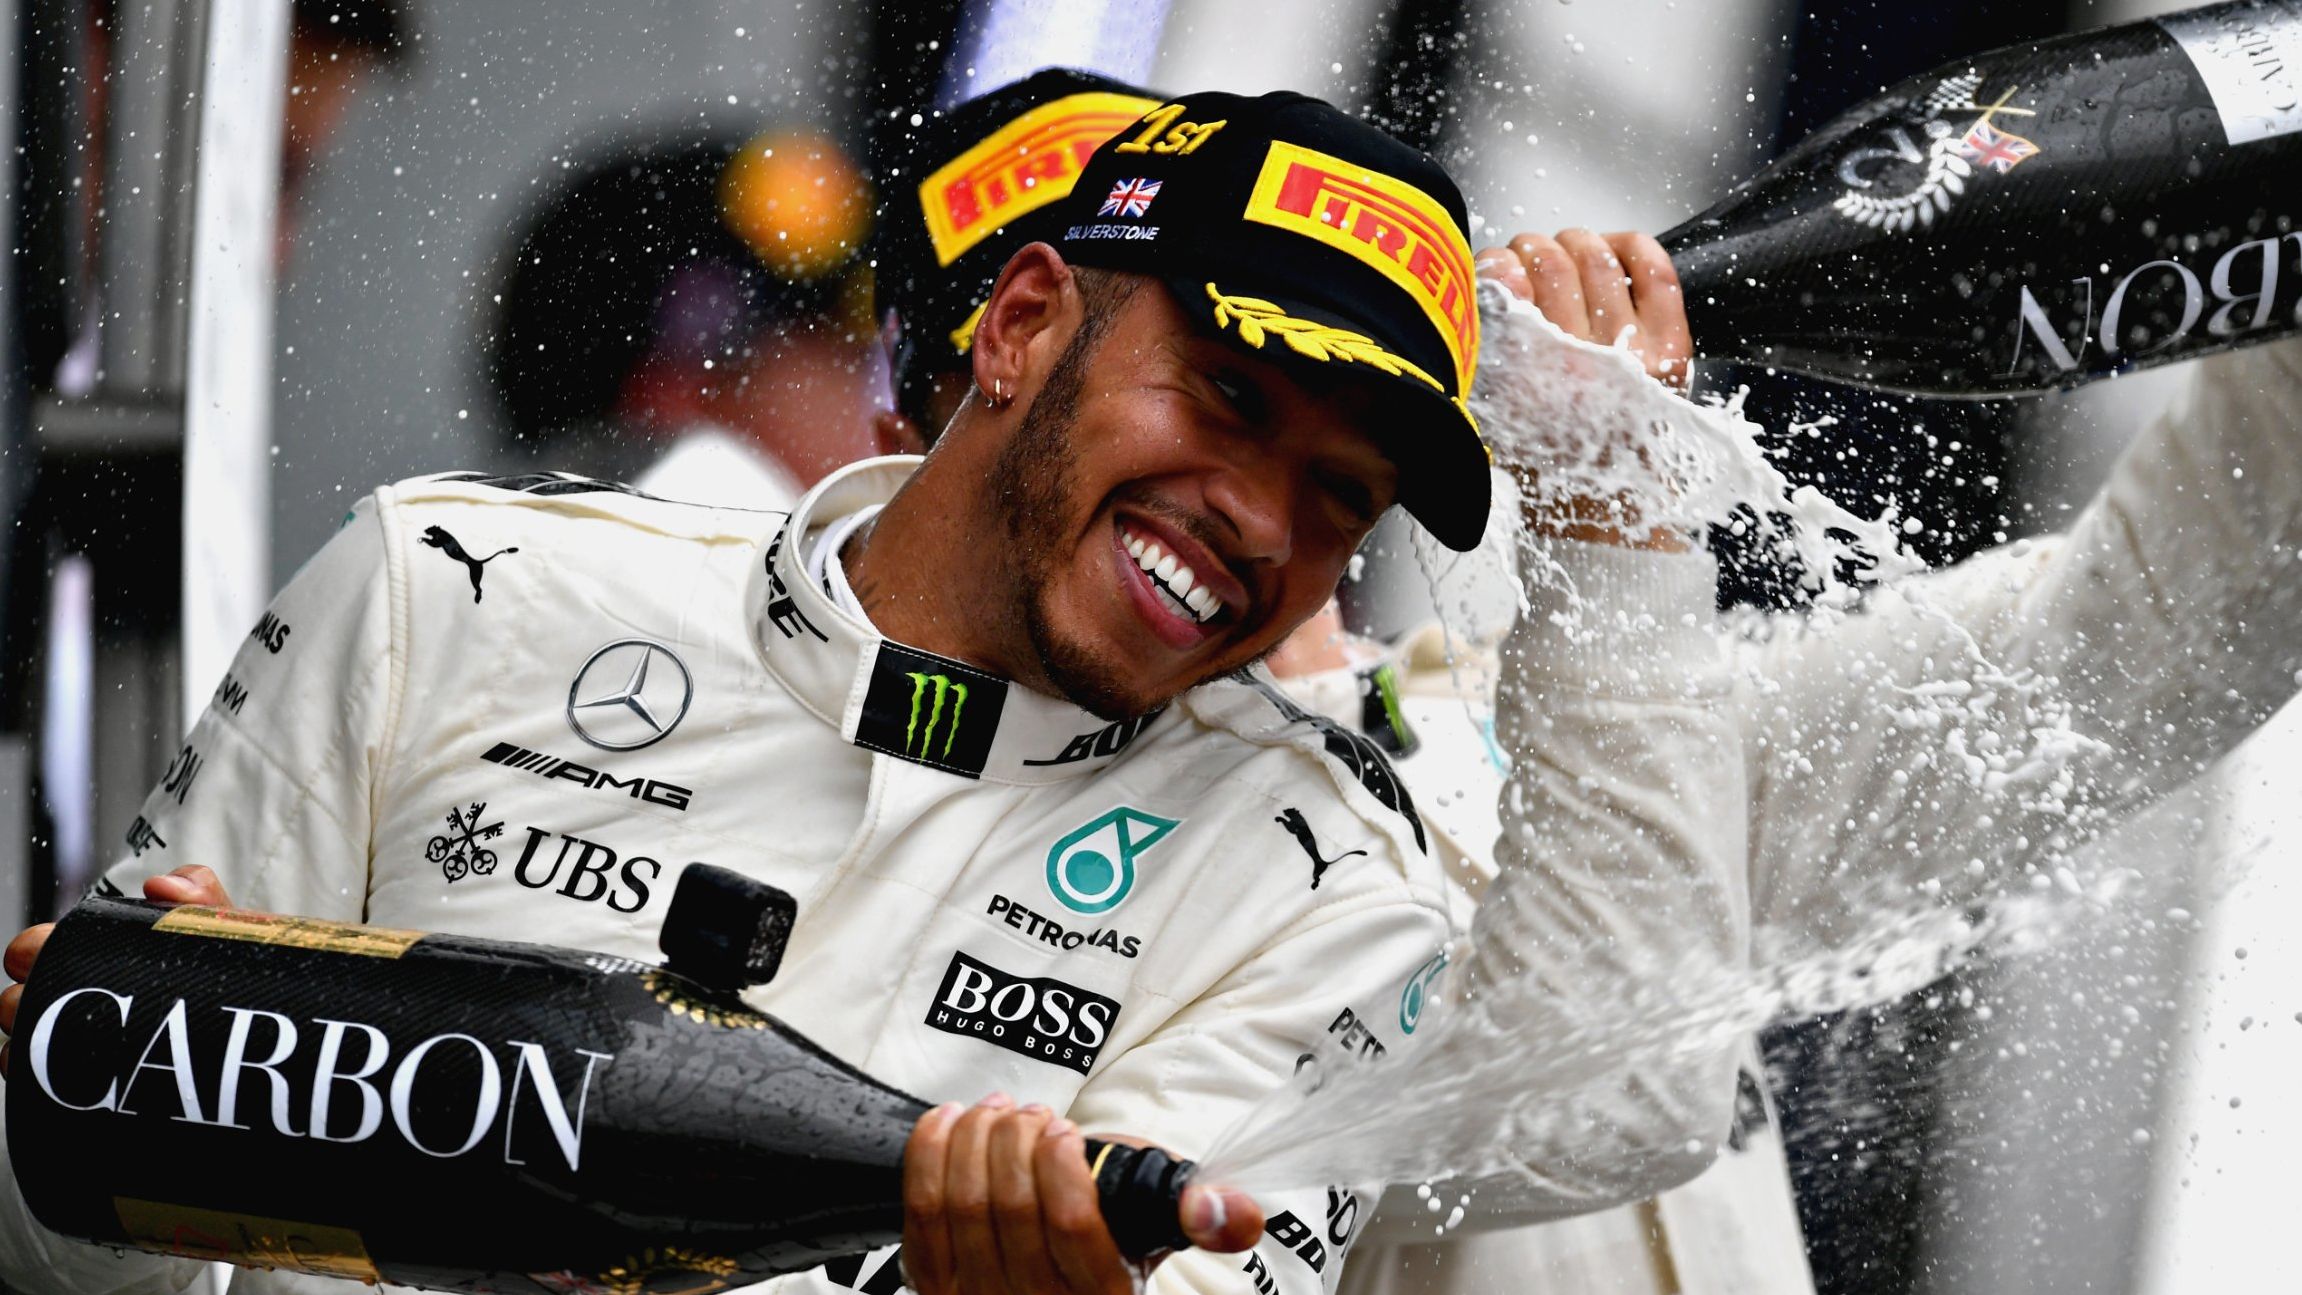 Lewis Hamilton celebrates in traditional style after winning his fourth race of the 2017 season.